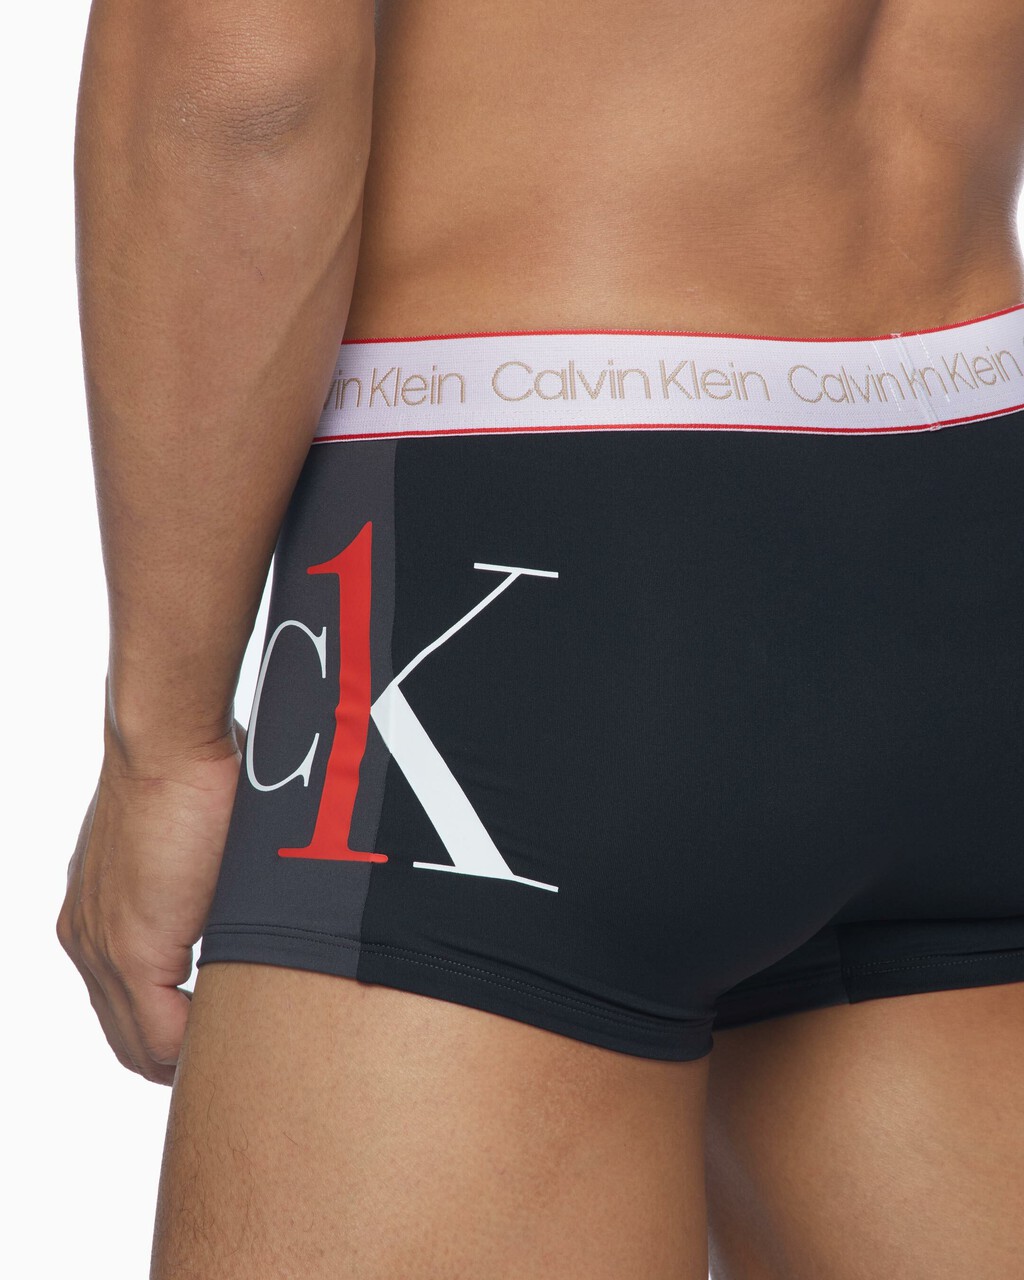 CK ONE GRAPHIC LOGO MICRO LOW RISE TRUNK, Void, hi-res